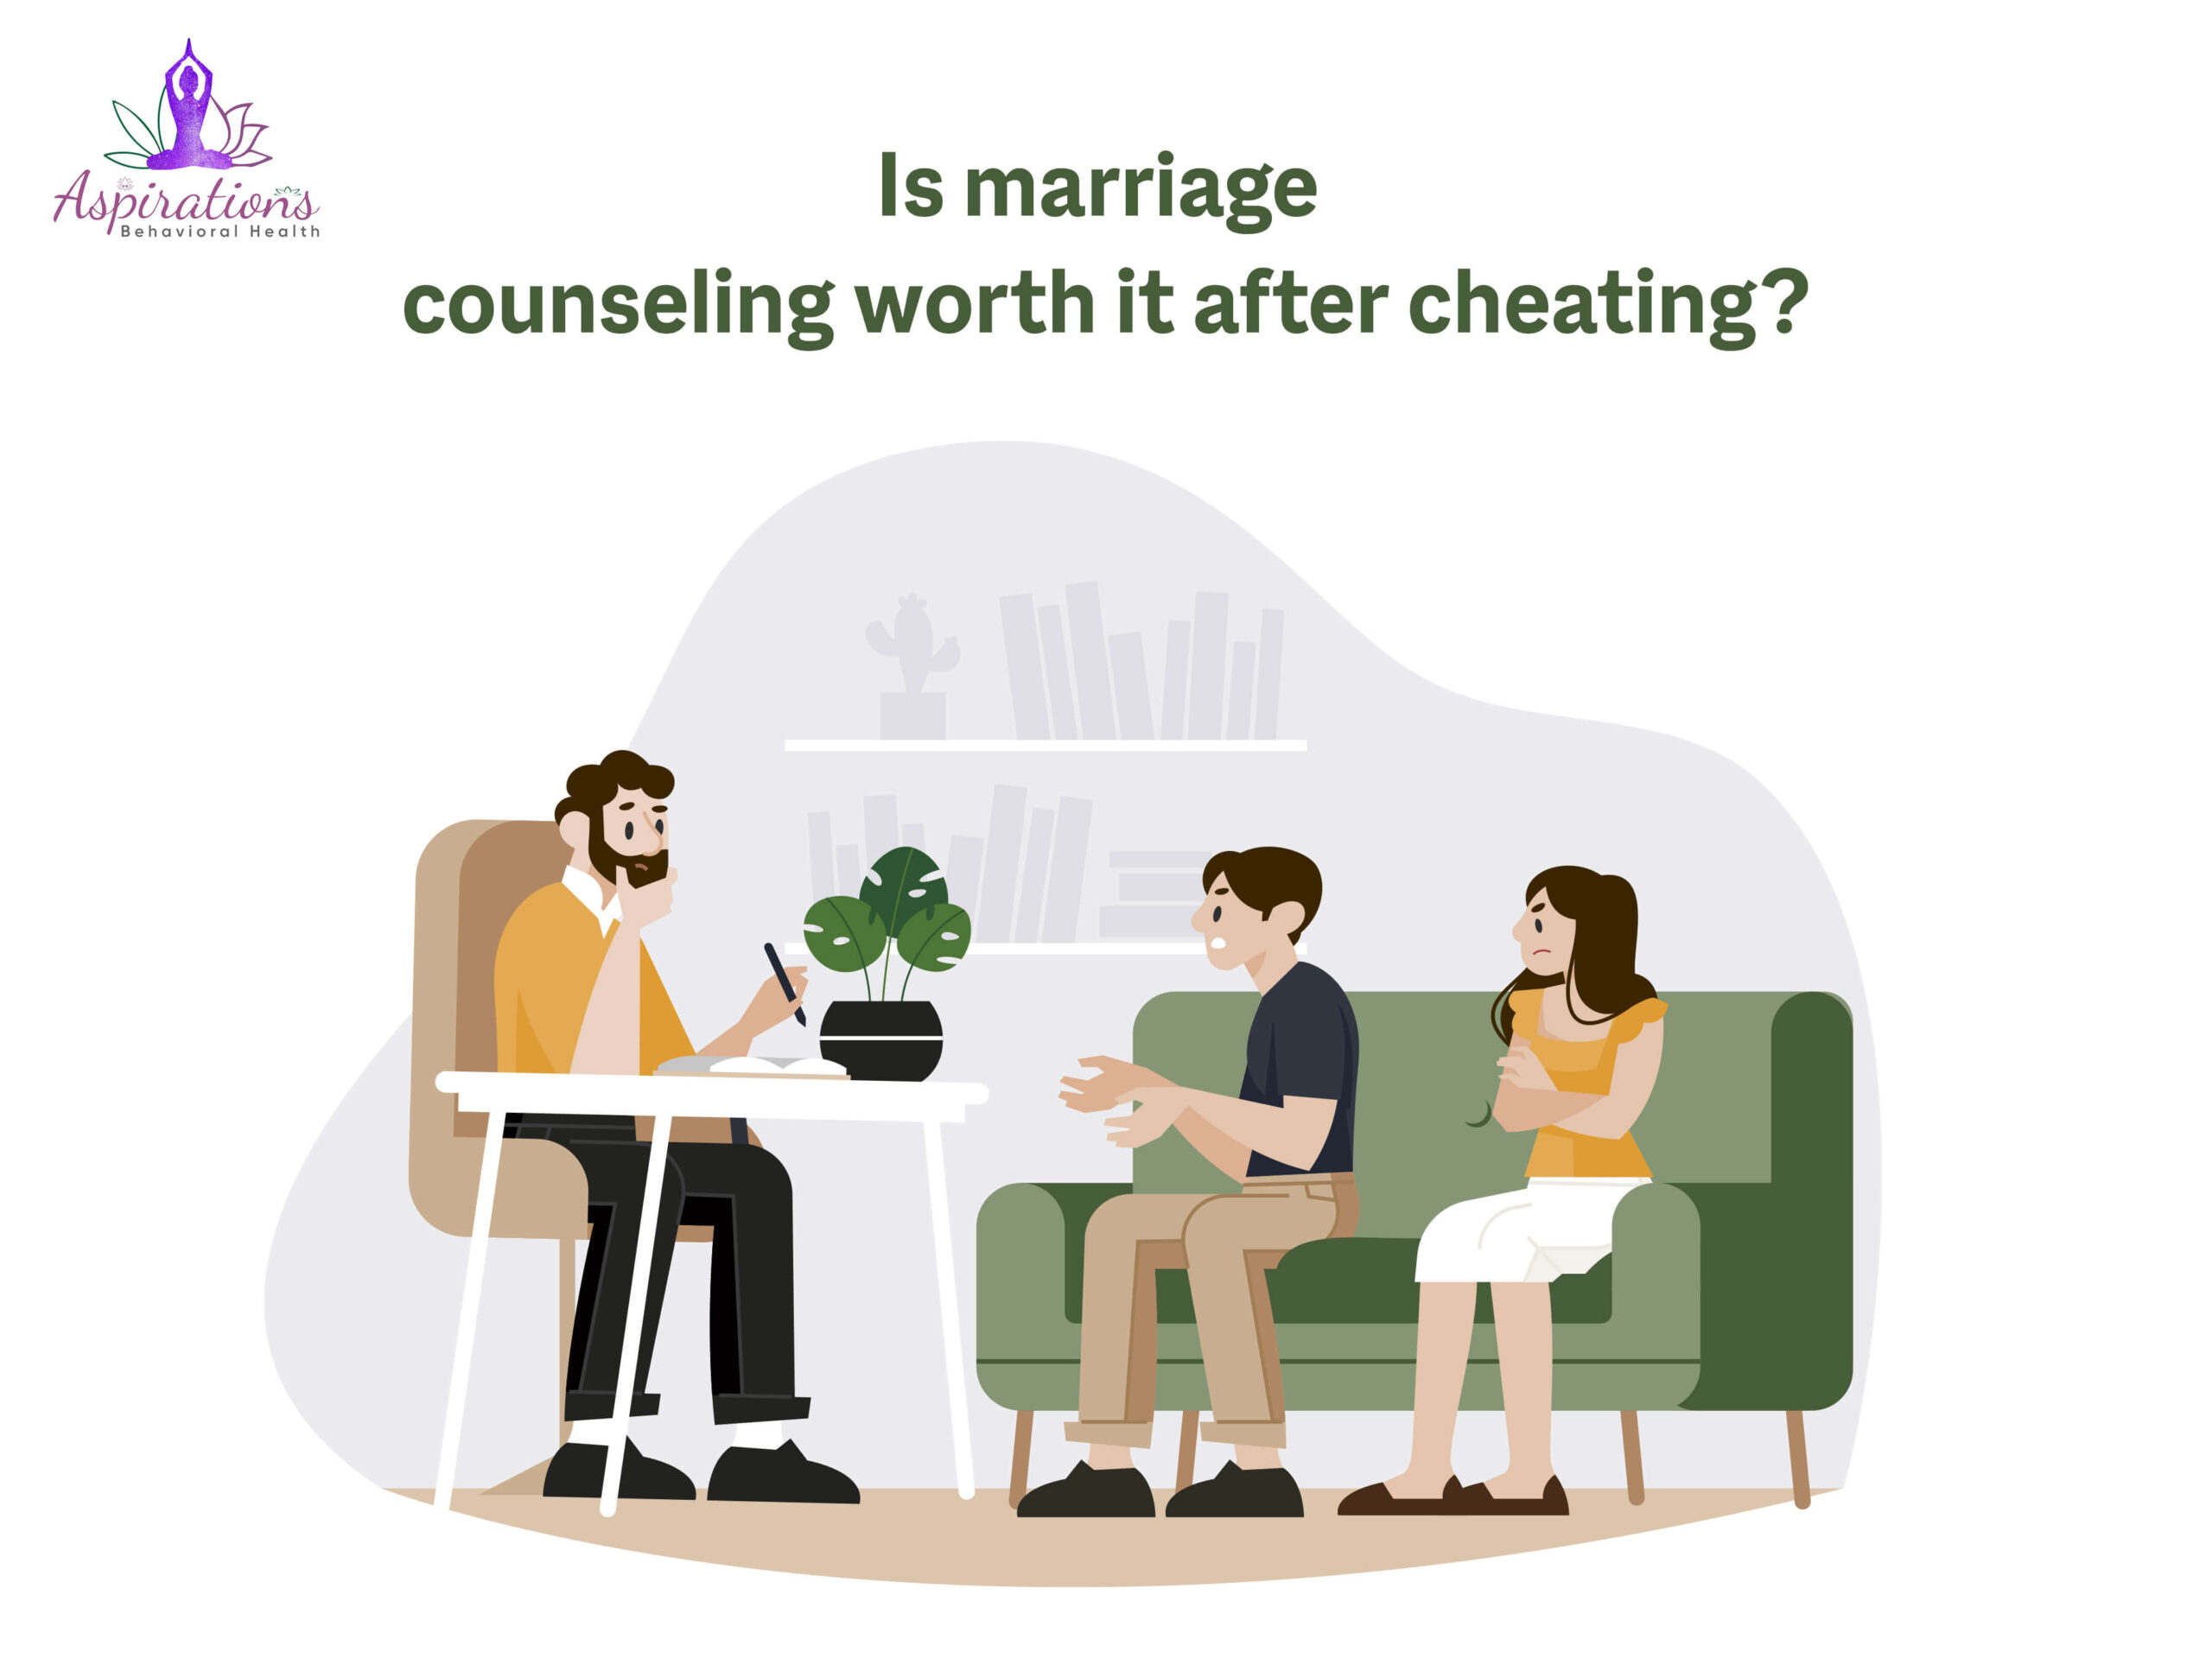 Is marriage counseling worth it after cheating?